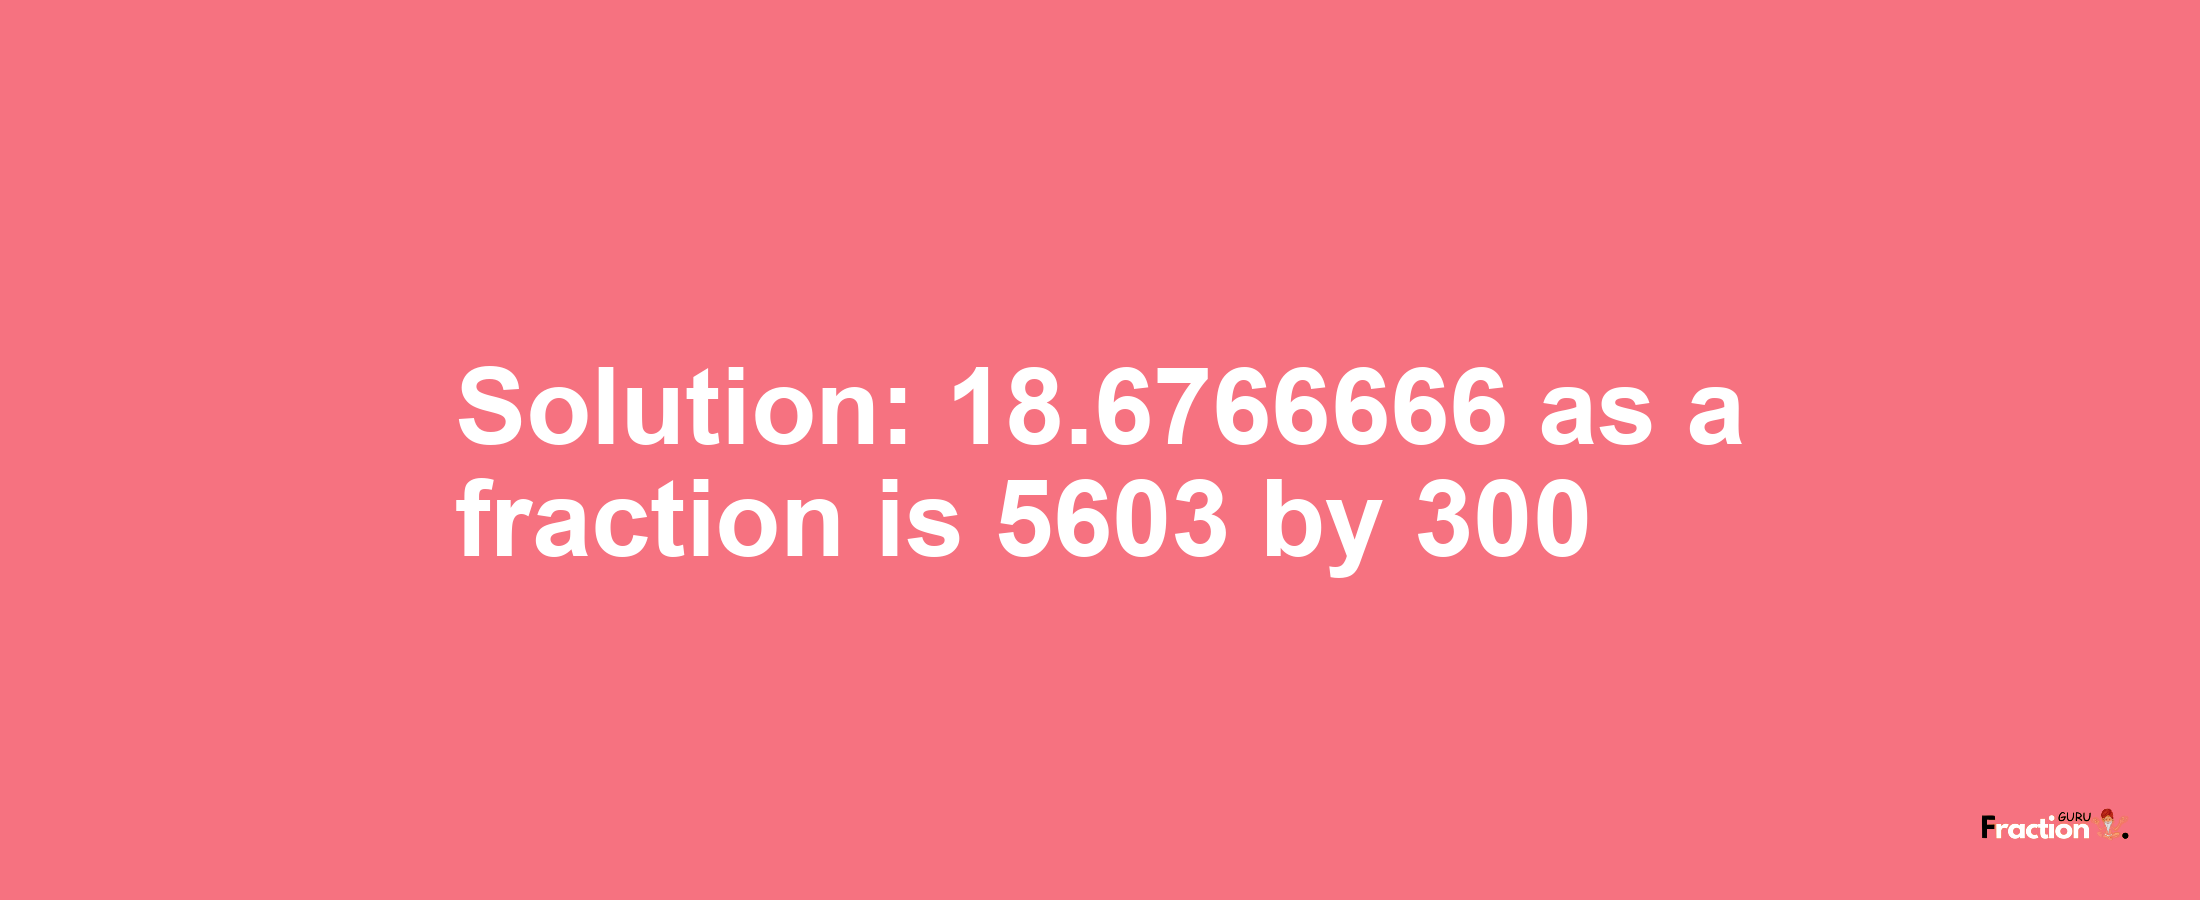 Solution:18.6766666 as a fraction is 5603/300